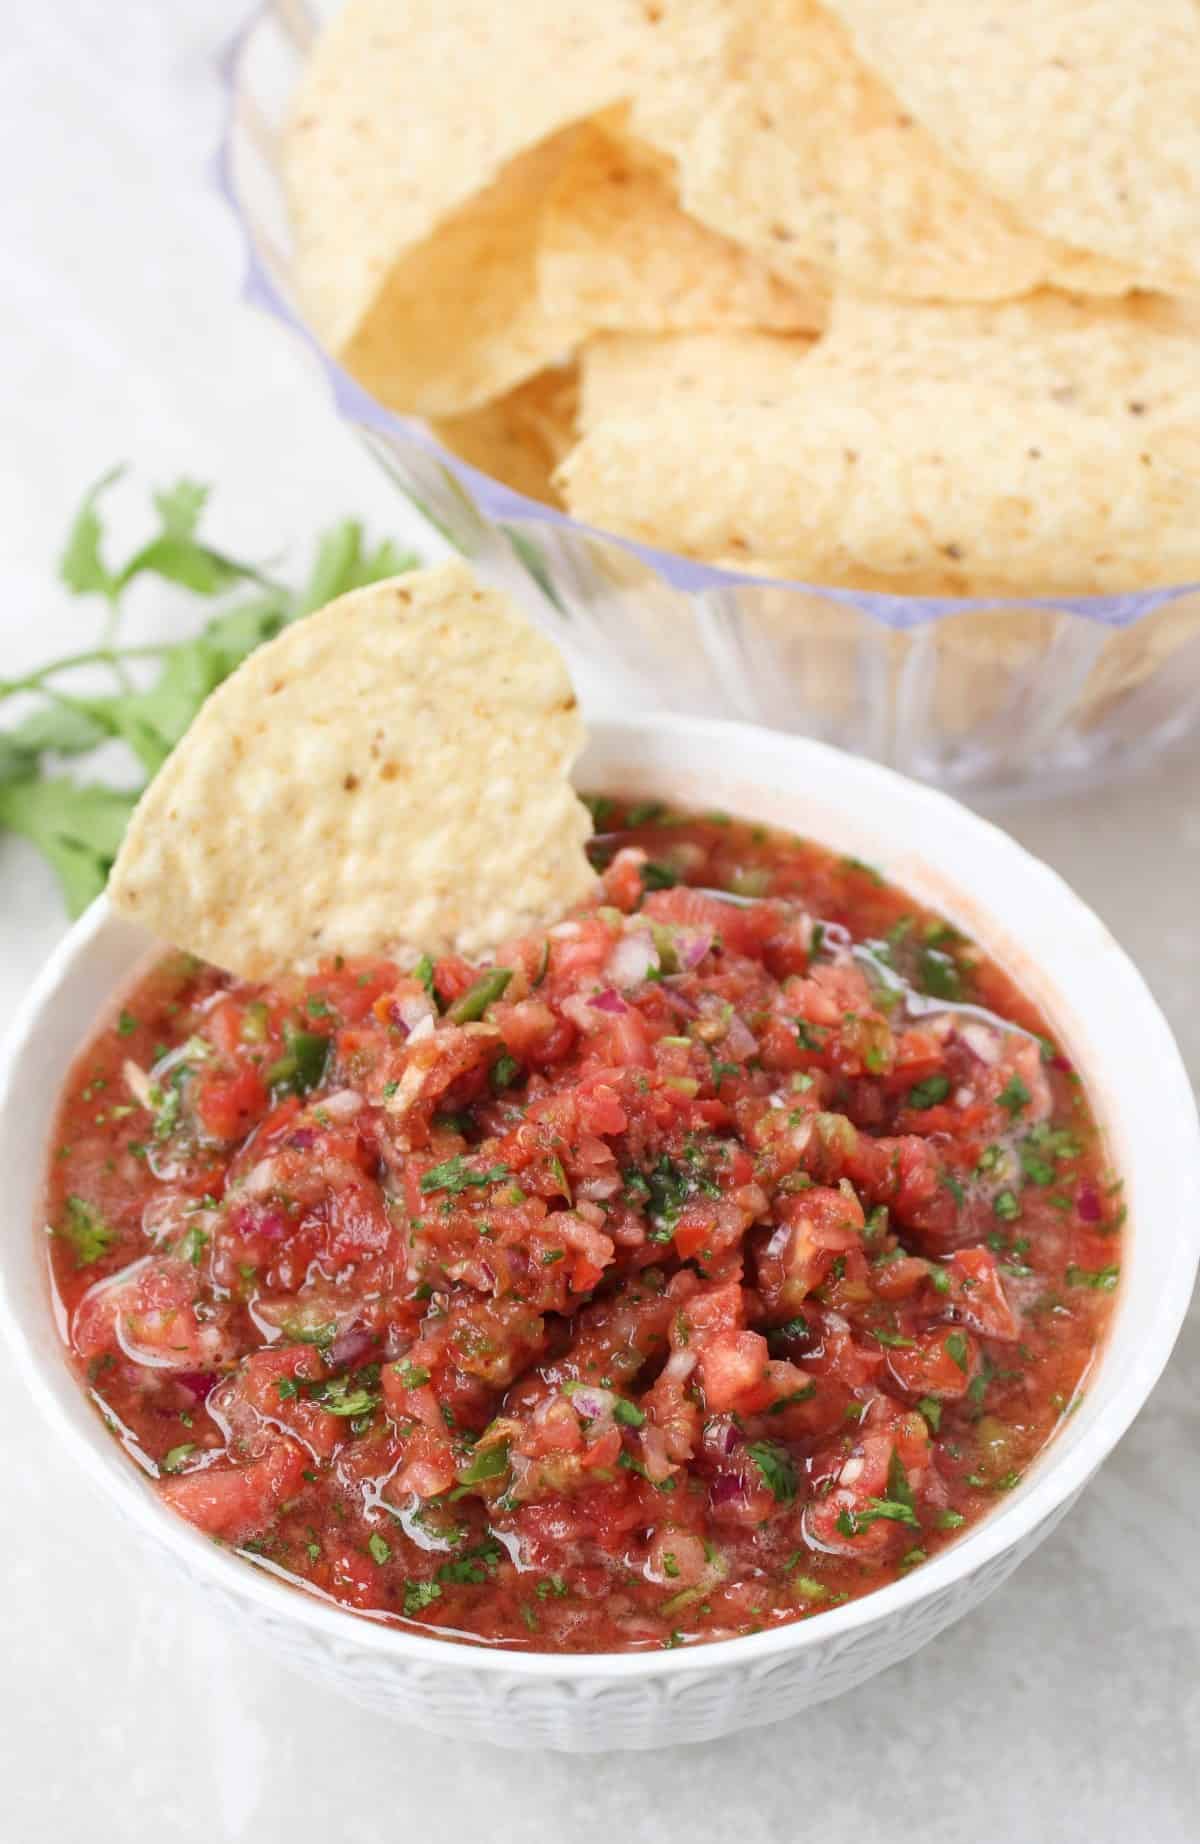 Tomato salsa in a white bowl with tortilla chips